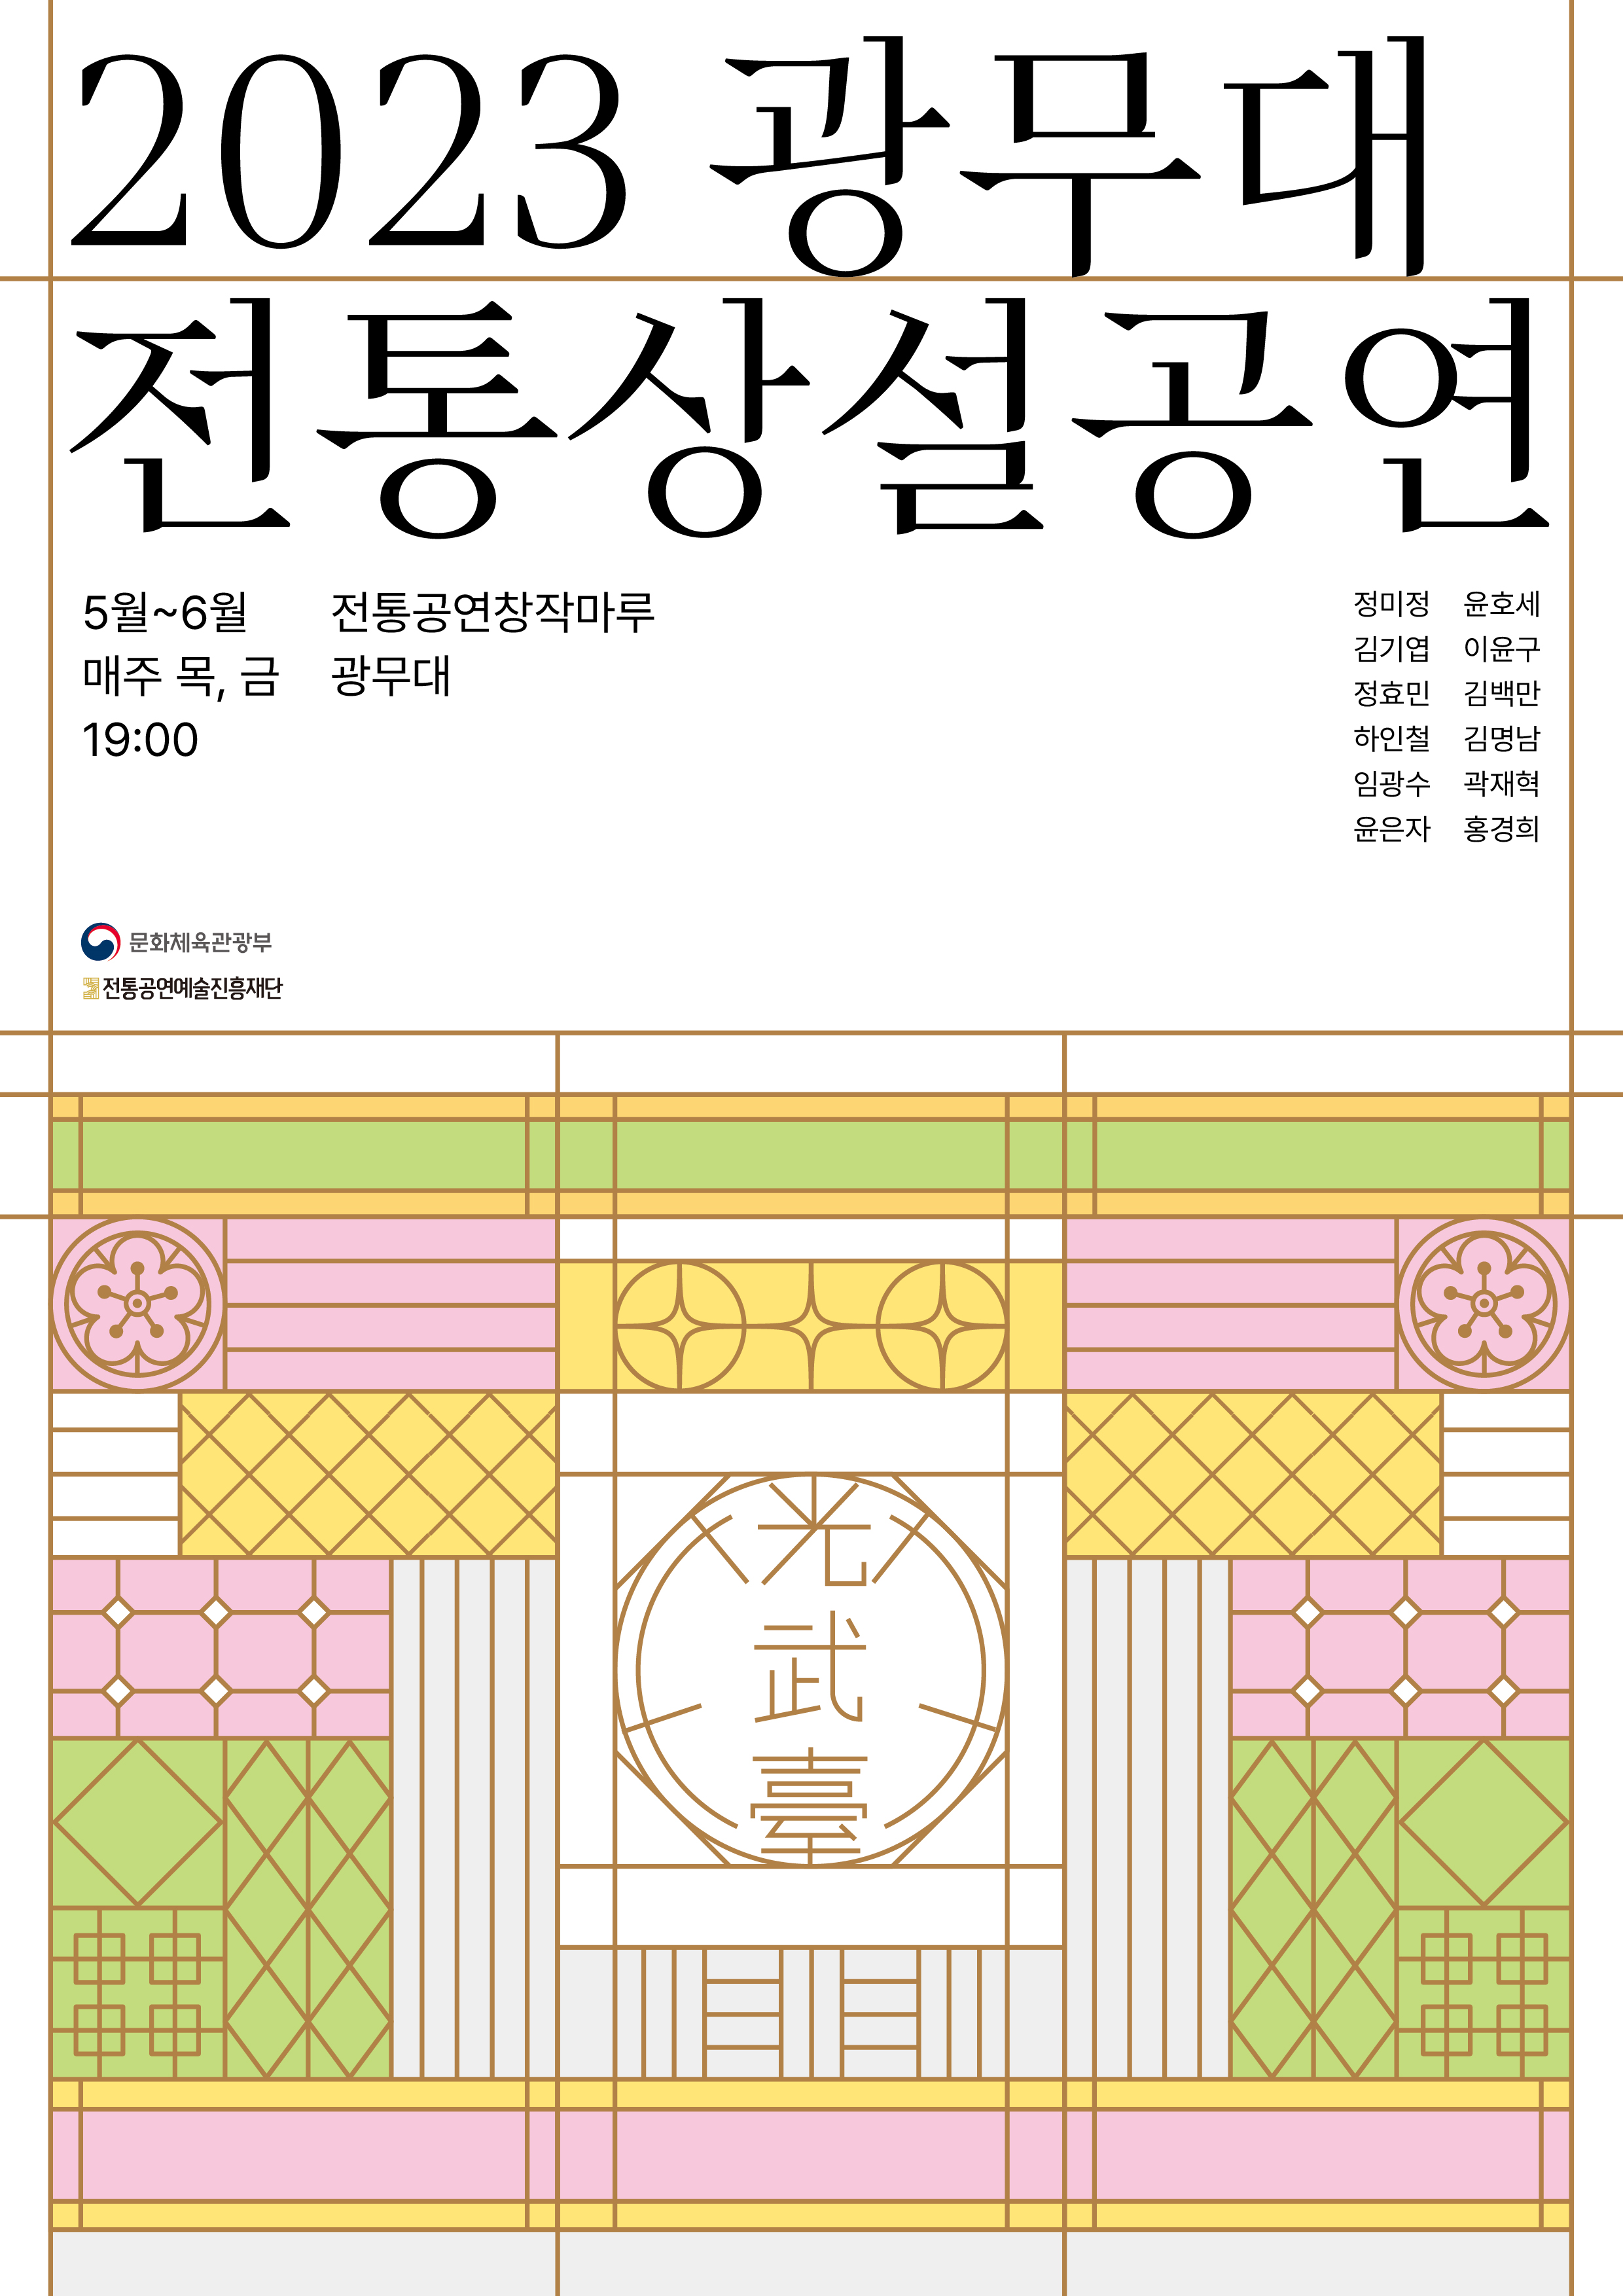 Poster for Gwangmudae Traditional Performing Arts 2023